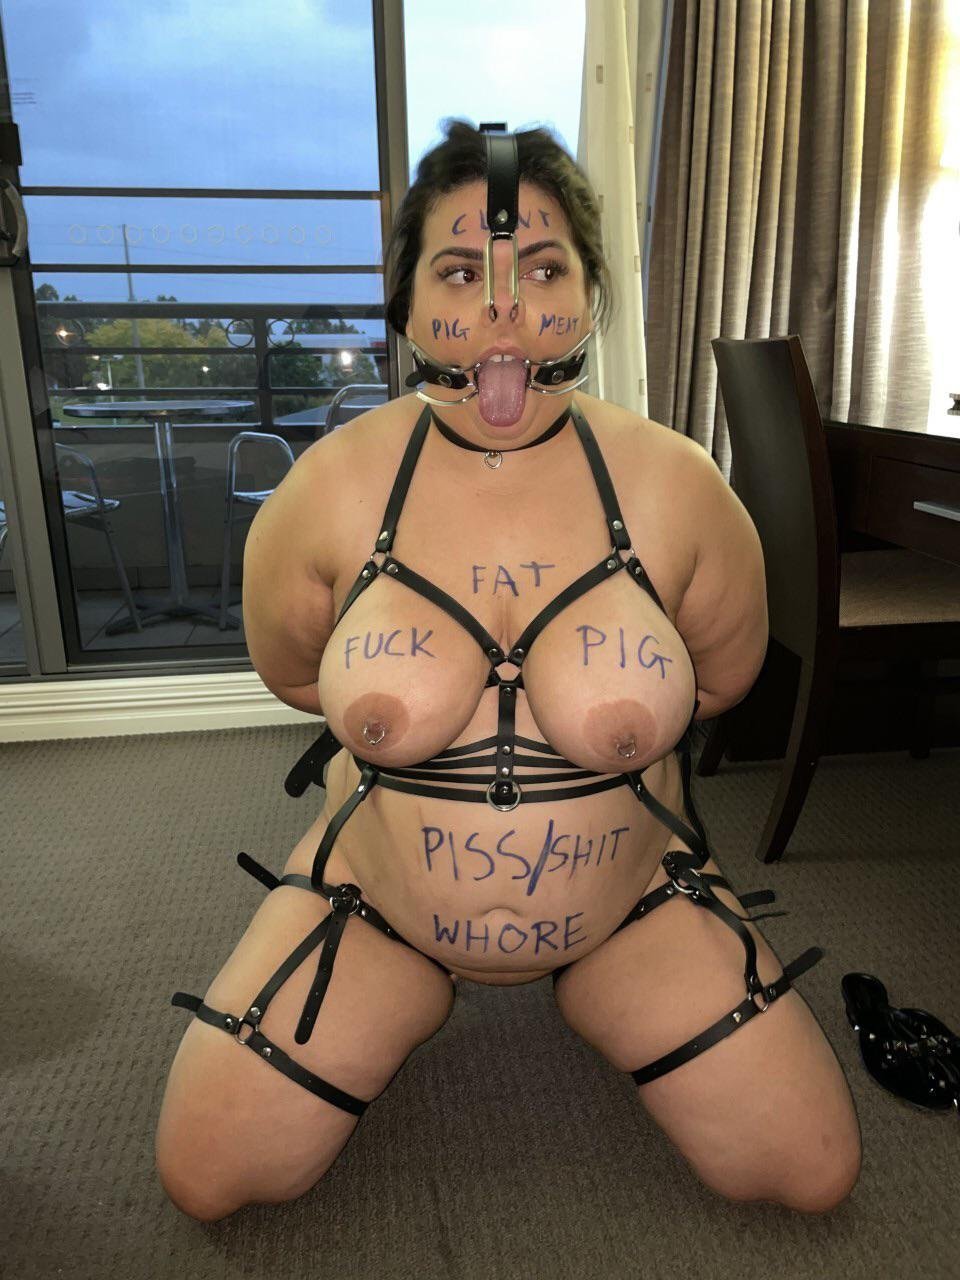 Perfect humiliation Pig - Porn Videos and Photos pic